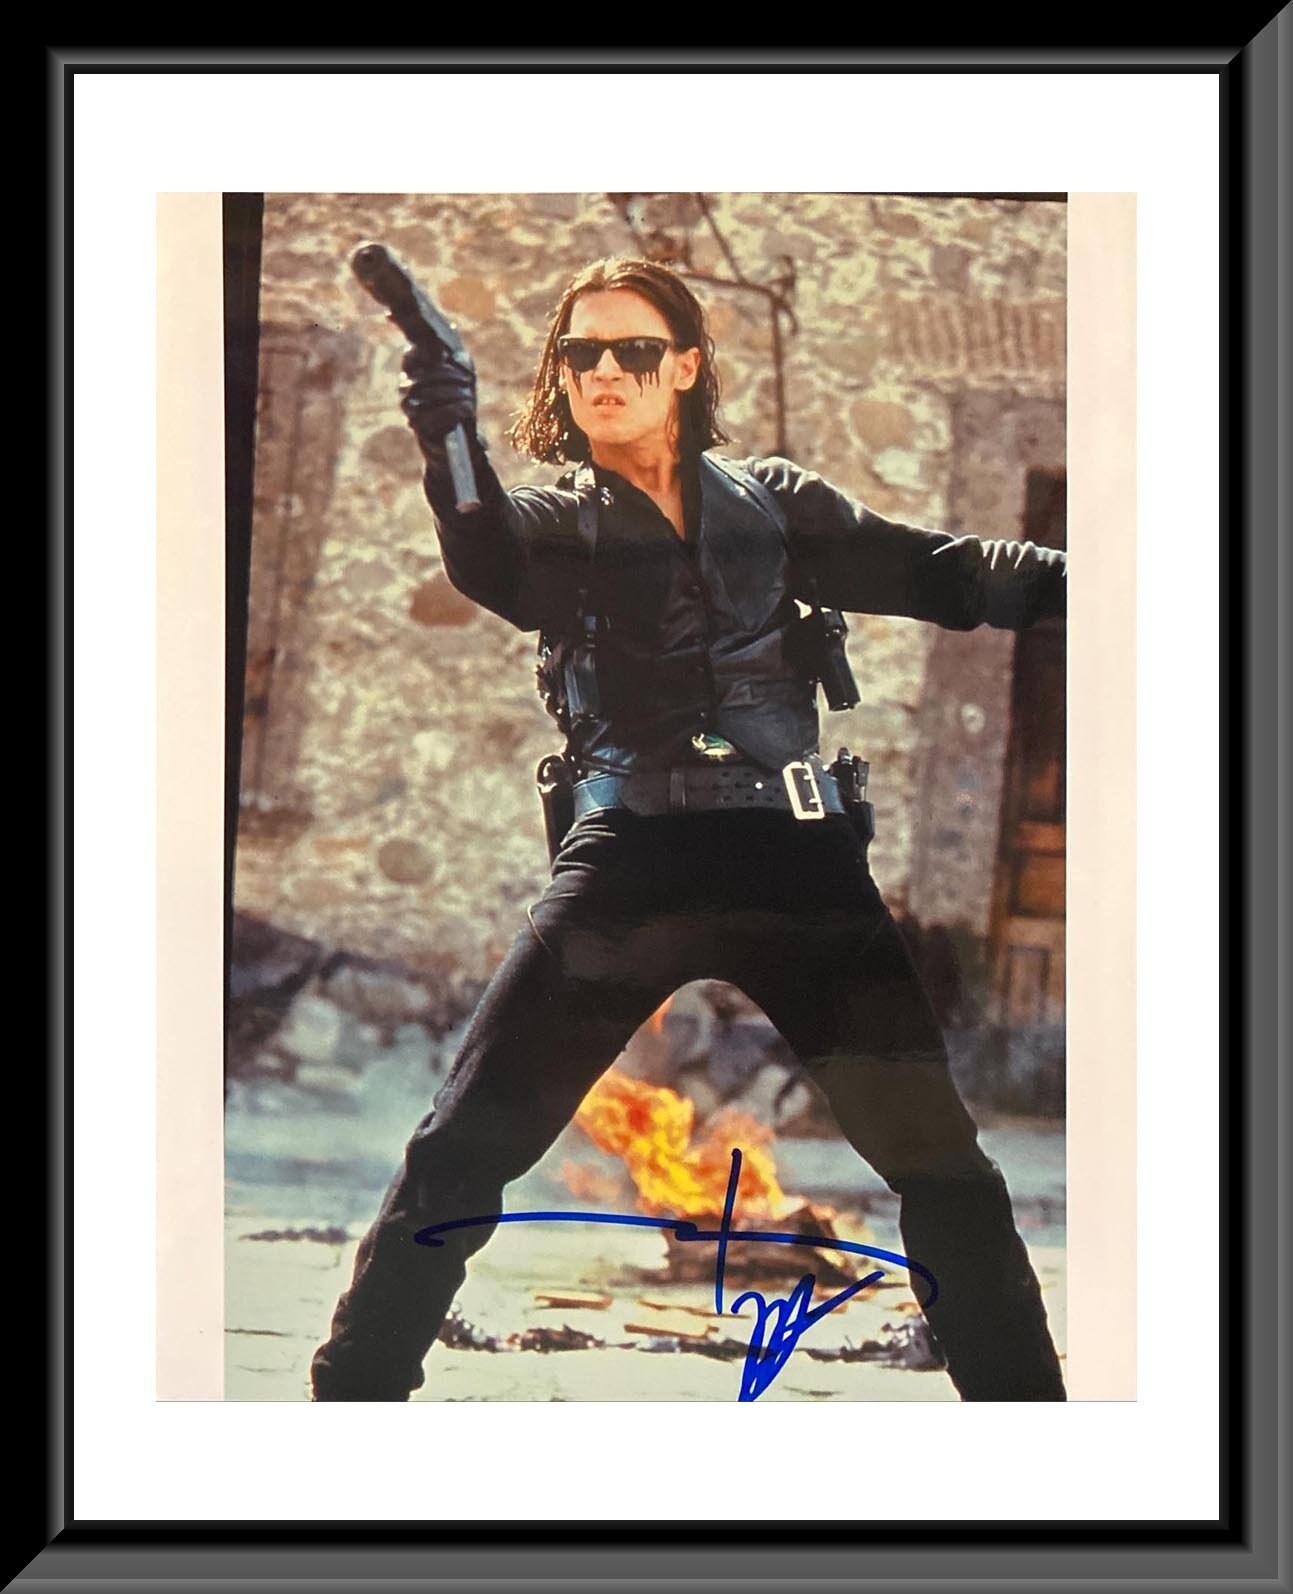 Johnny Signed once Upon a Time Mexico - Etsy